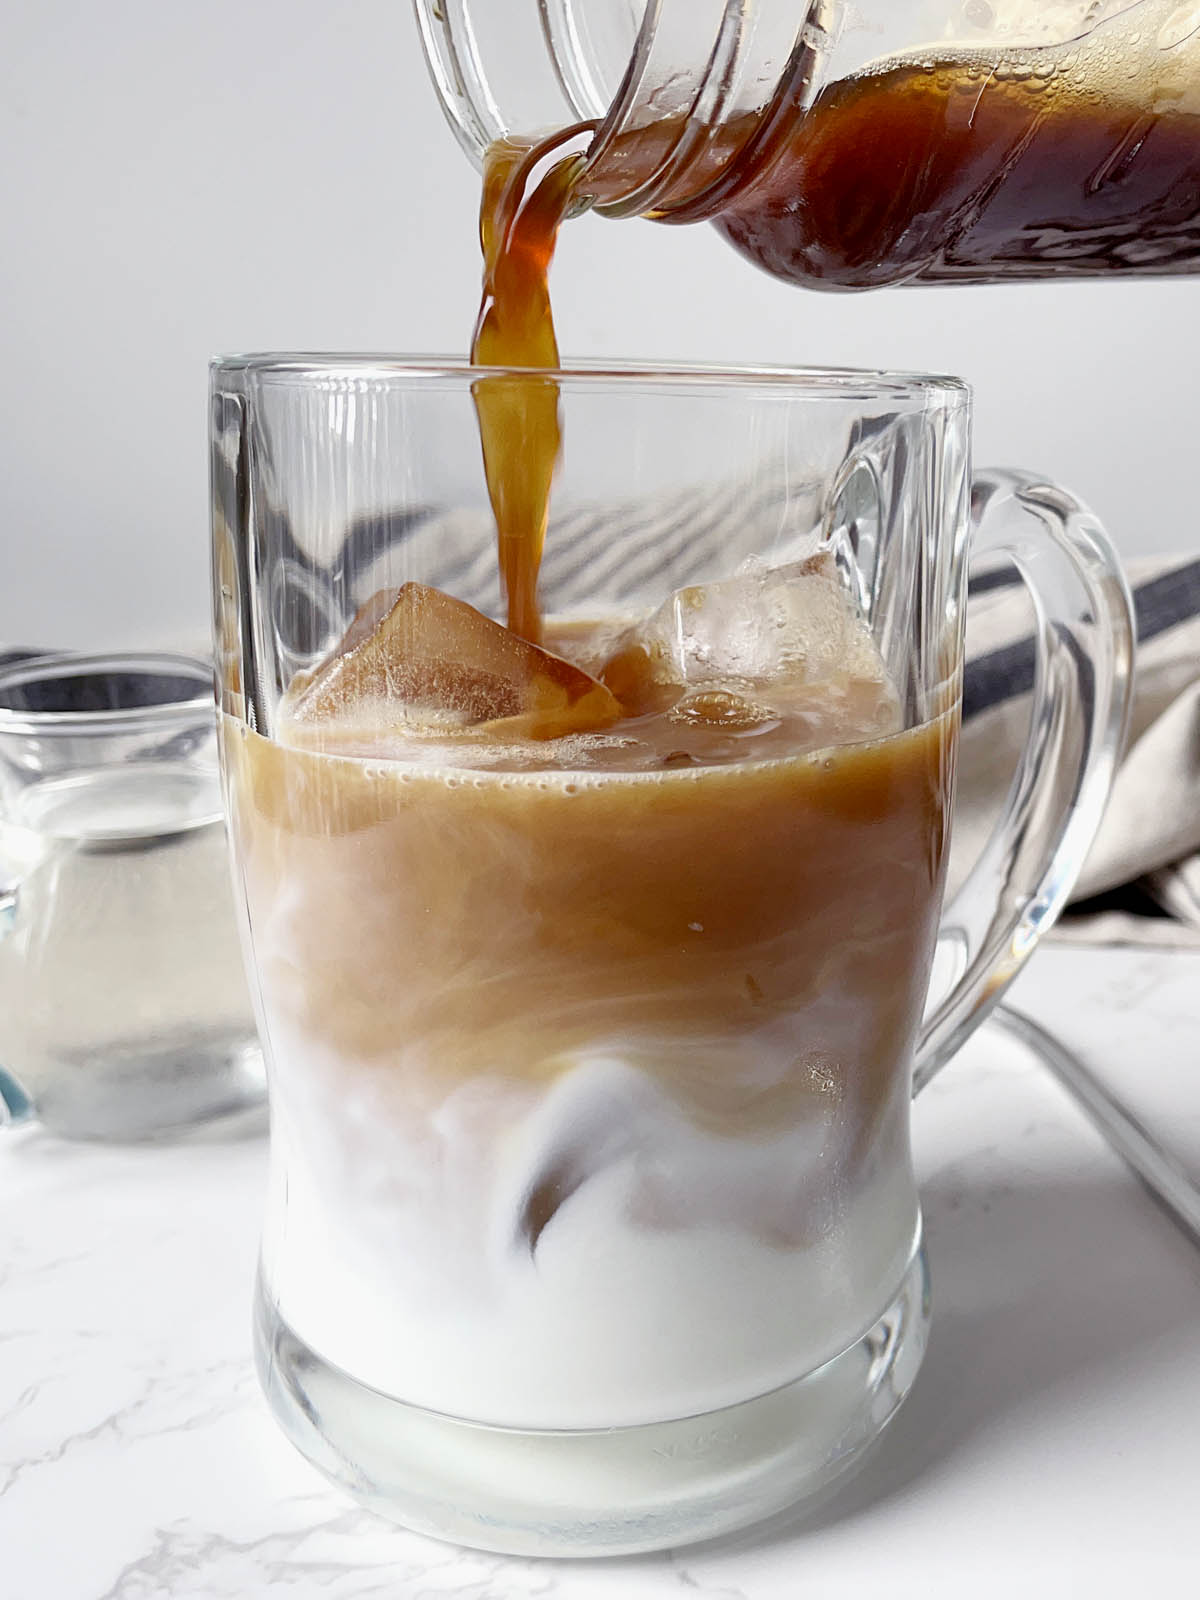 Close-up of a brown liquid being poured into a glass mug containing white milk and ice cubes.